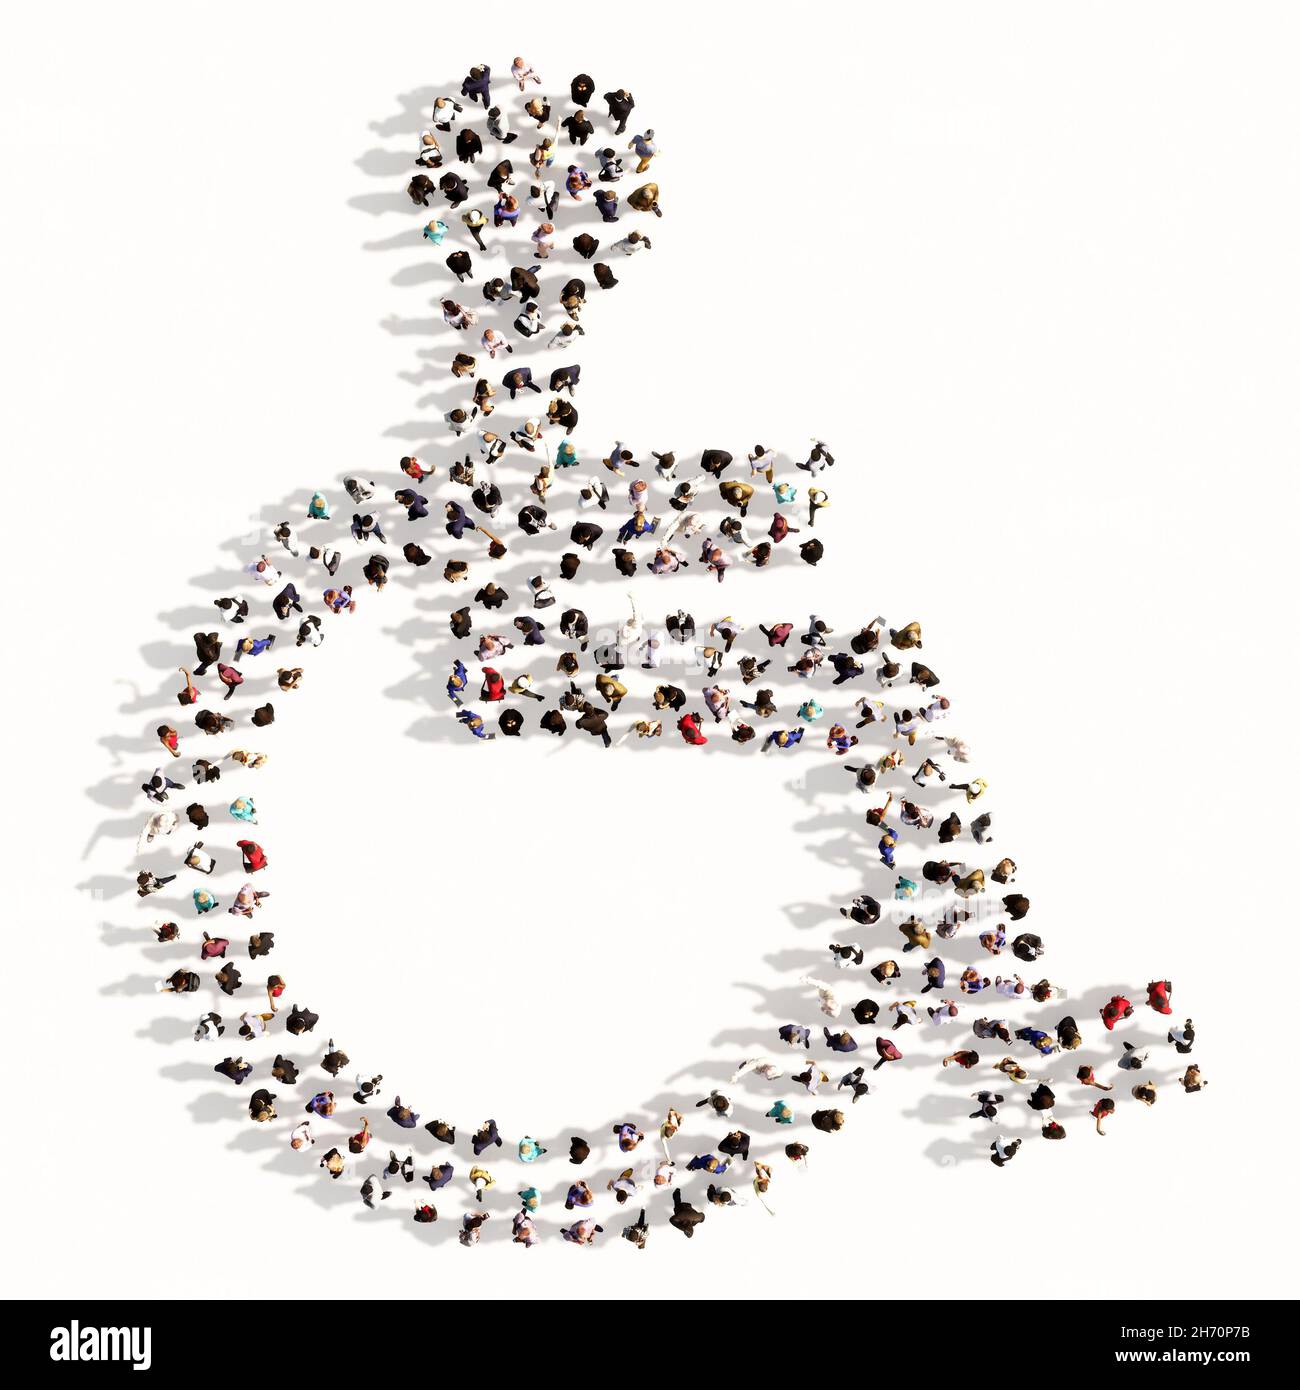 Concept conceptual large community of people forming the wheel chair sign. 3d illustration metaphor for rehabilitation, assistance, accessibility Stock Photo